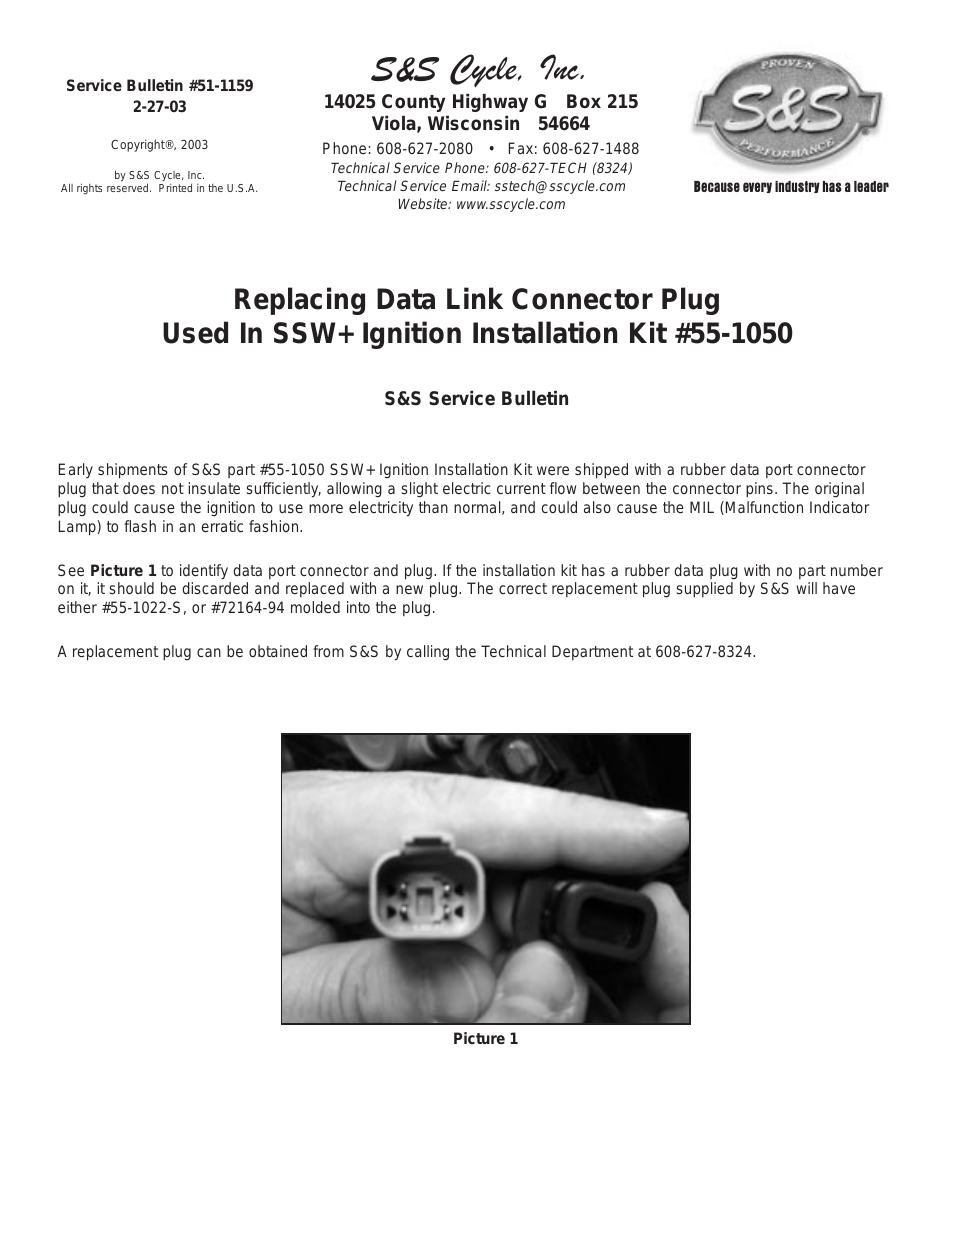 Replacing Data Link Connector Plug Used In SSW+ Ignition Kit 55-1050